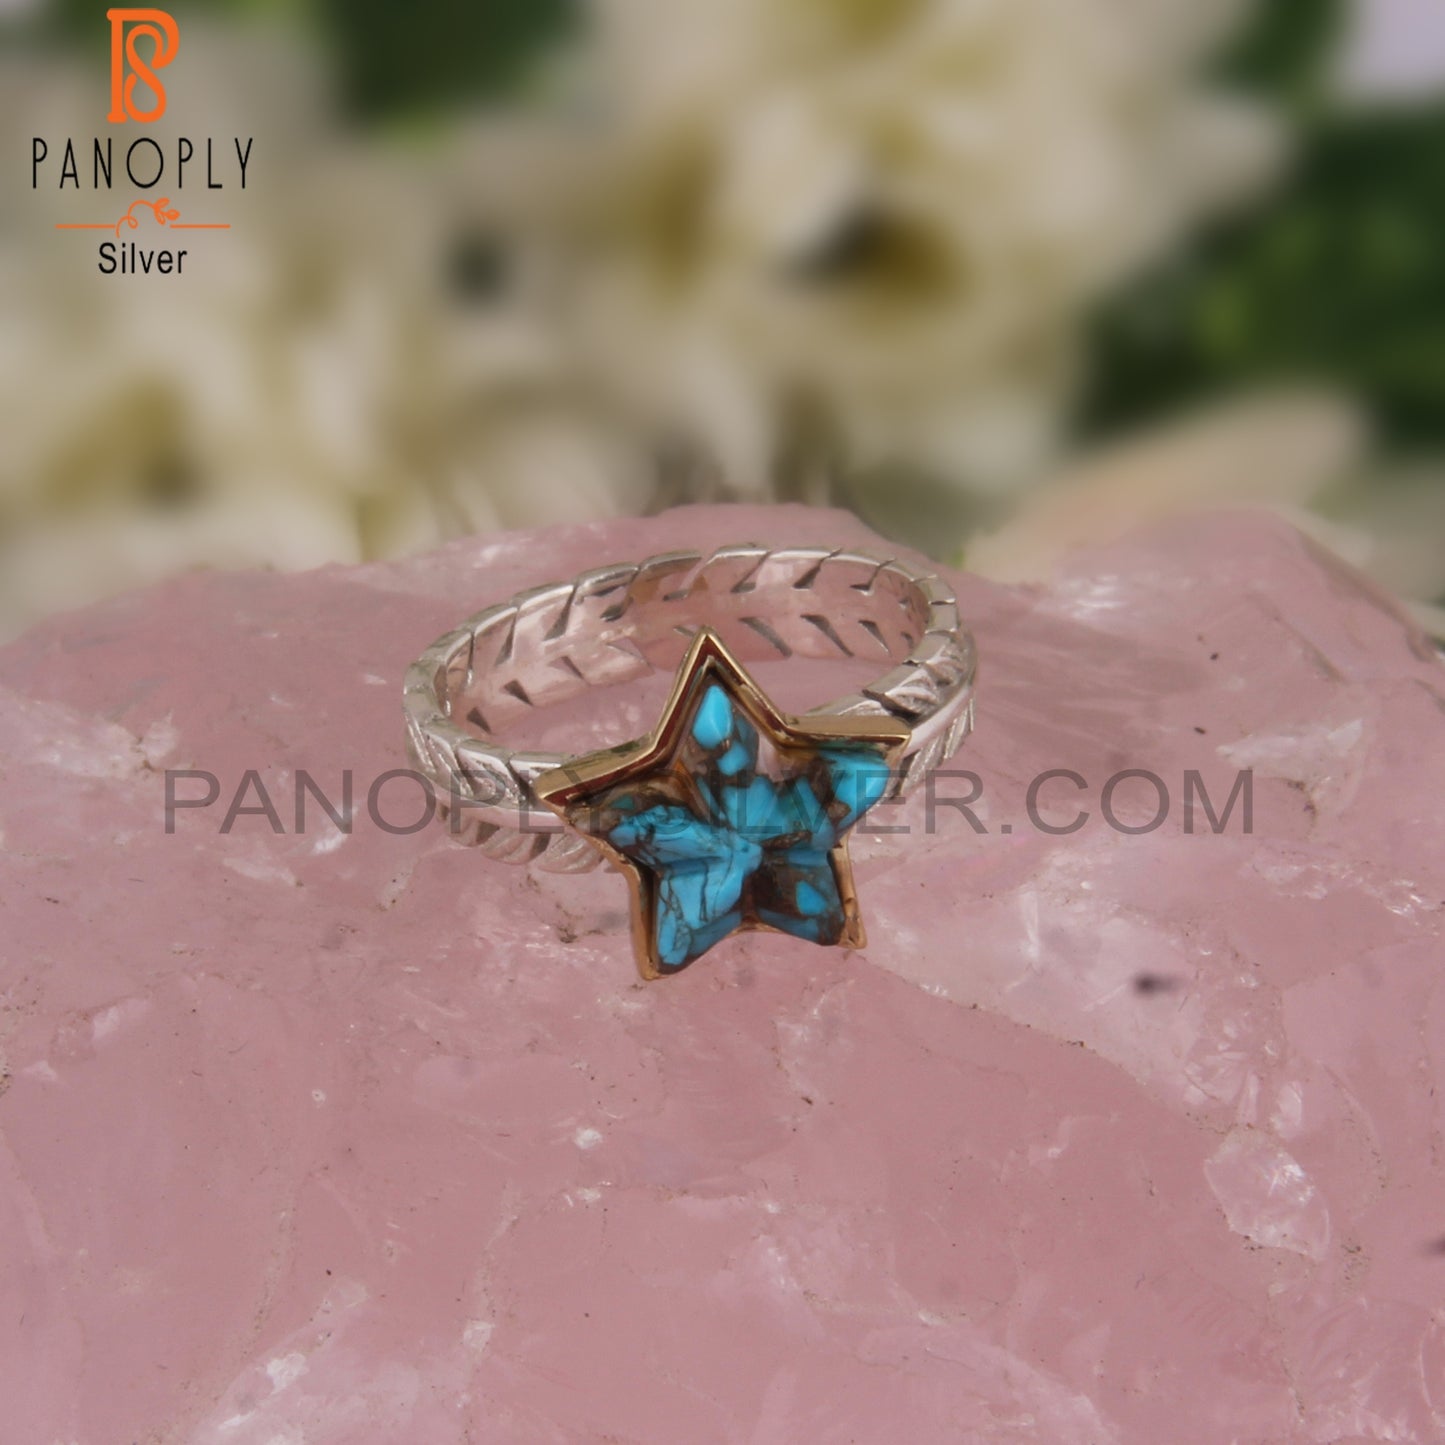 Mojave Copper Pink Opal Turquoise Star 925 Silver Ring